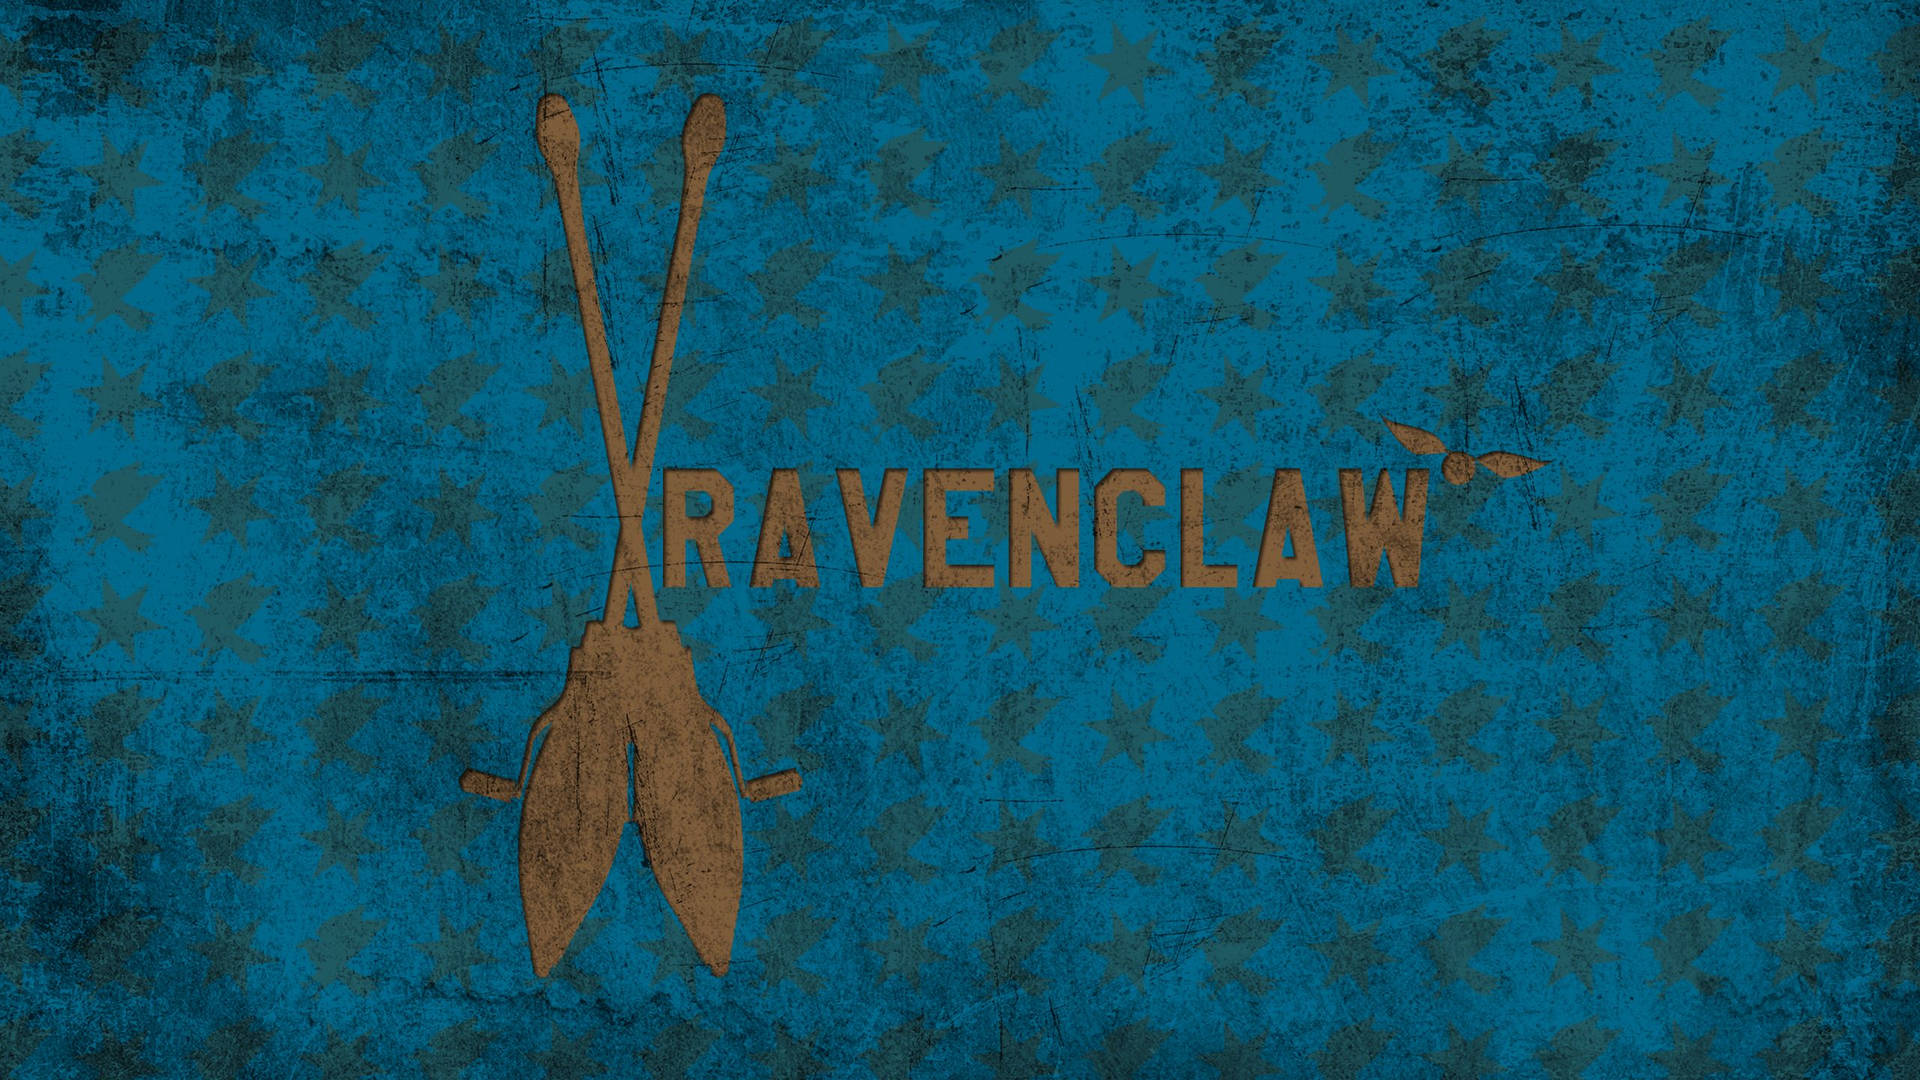 Harry Potter Houses Ravenclaw Quidditch